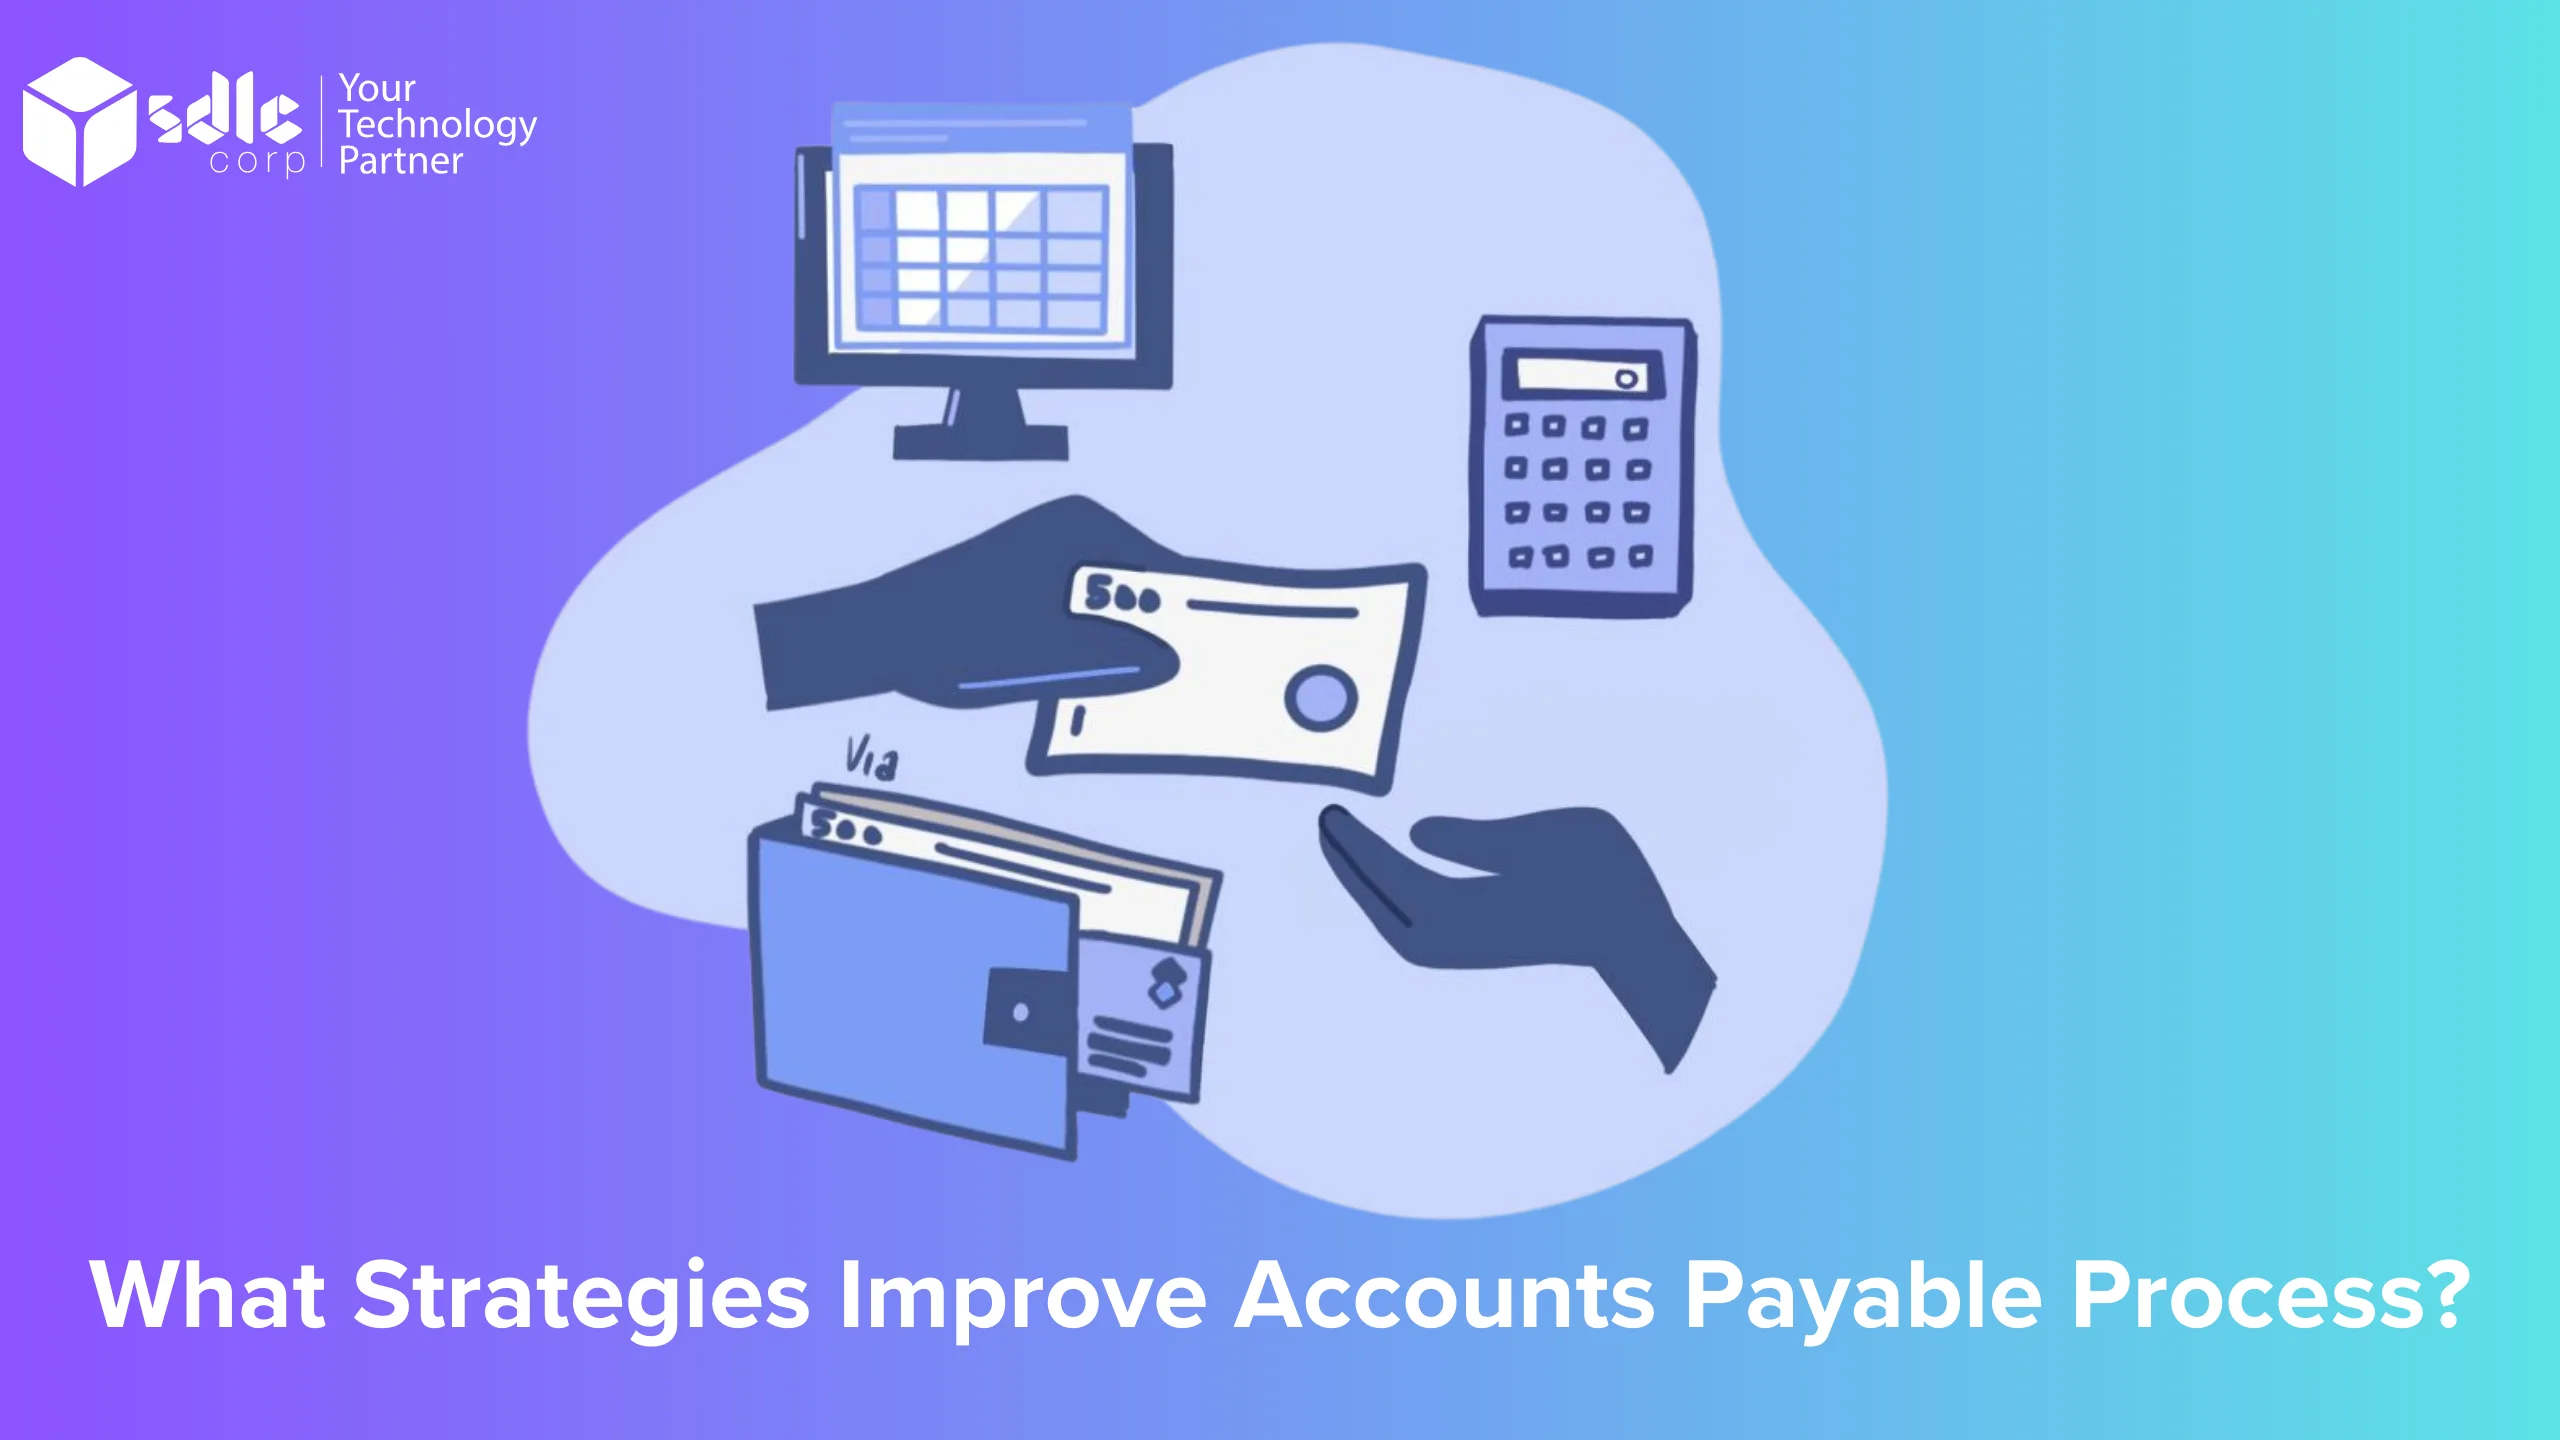 What Strategies Improve Accounts Payable Process